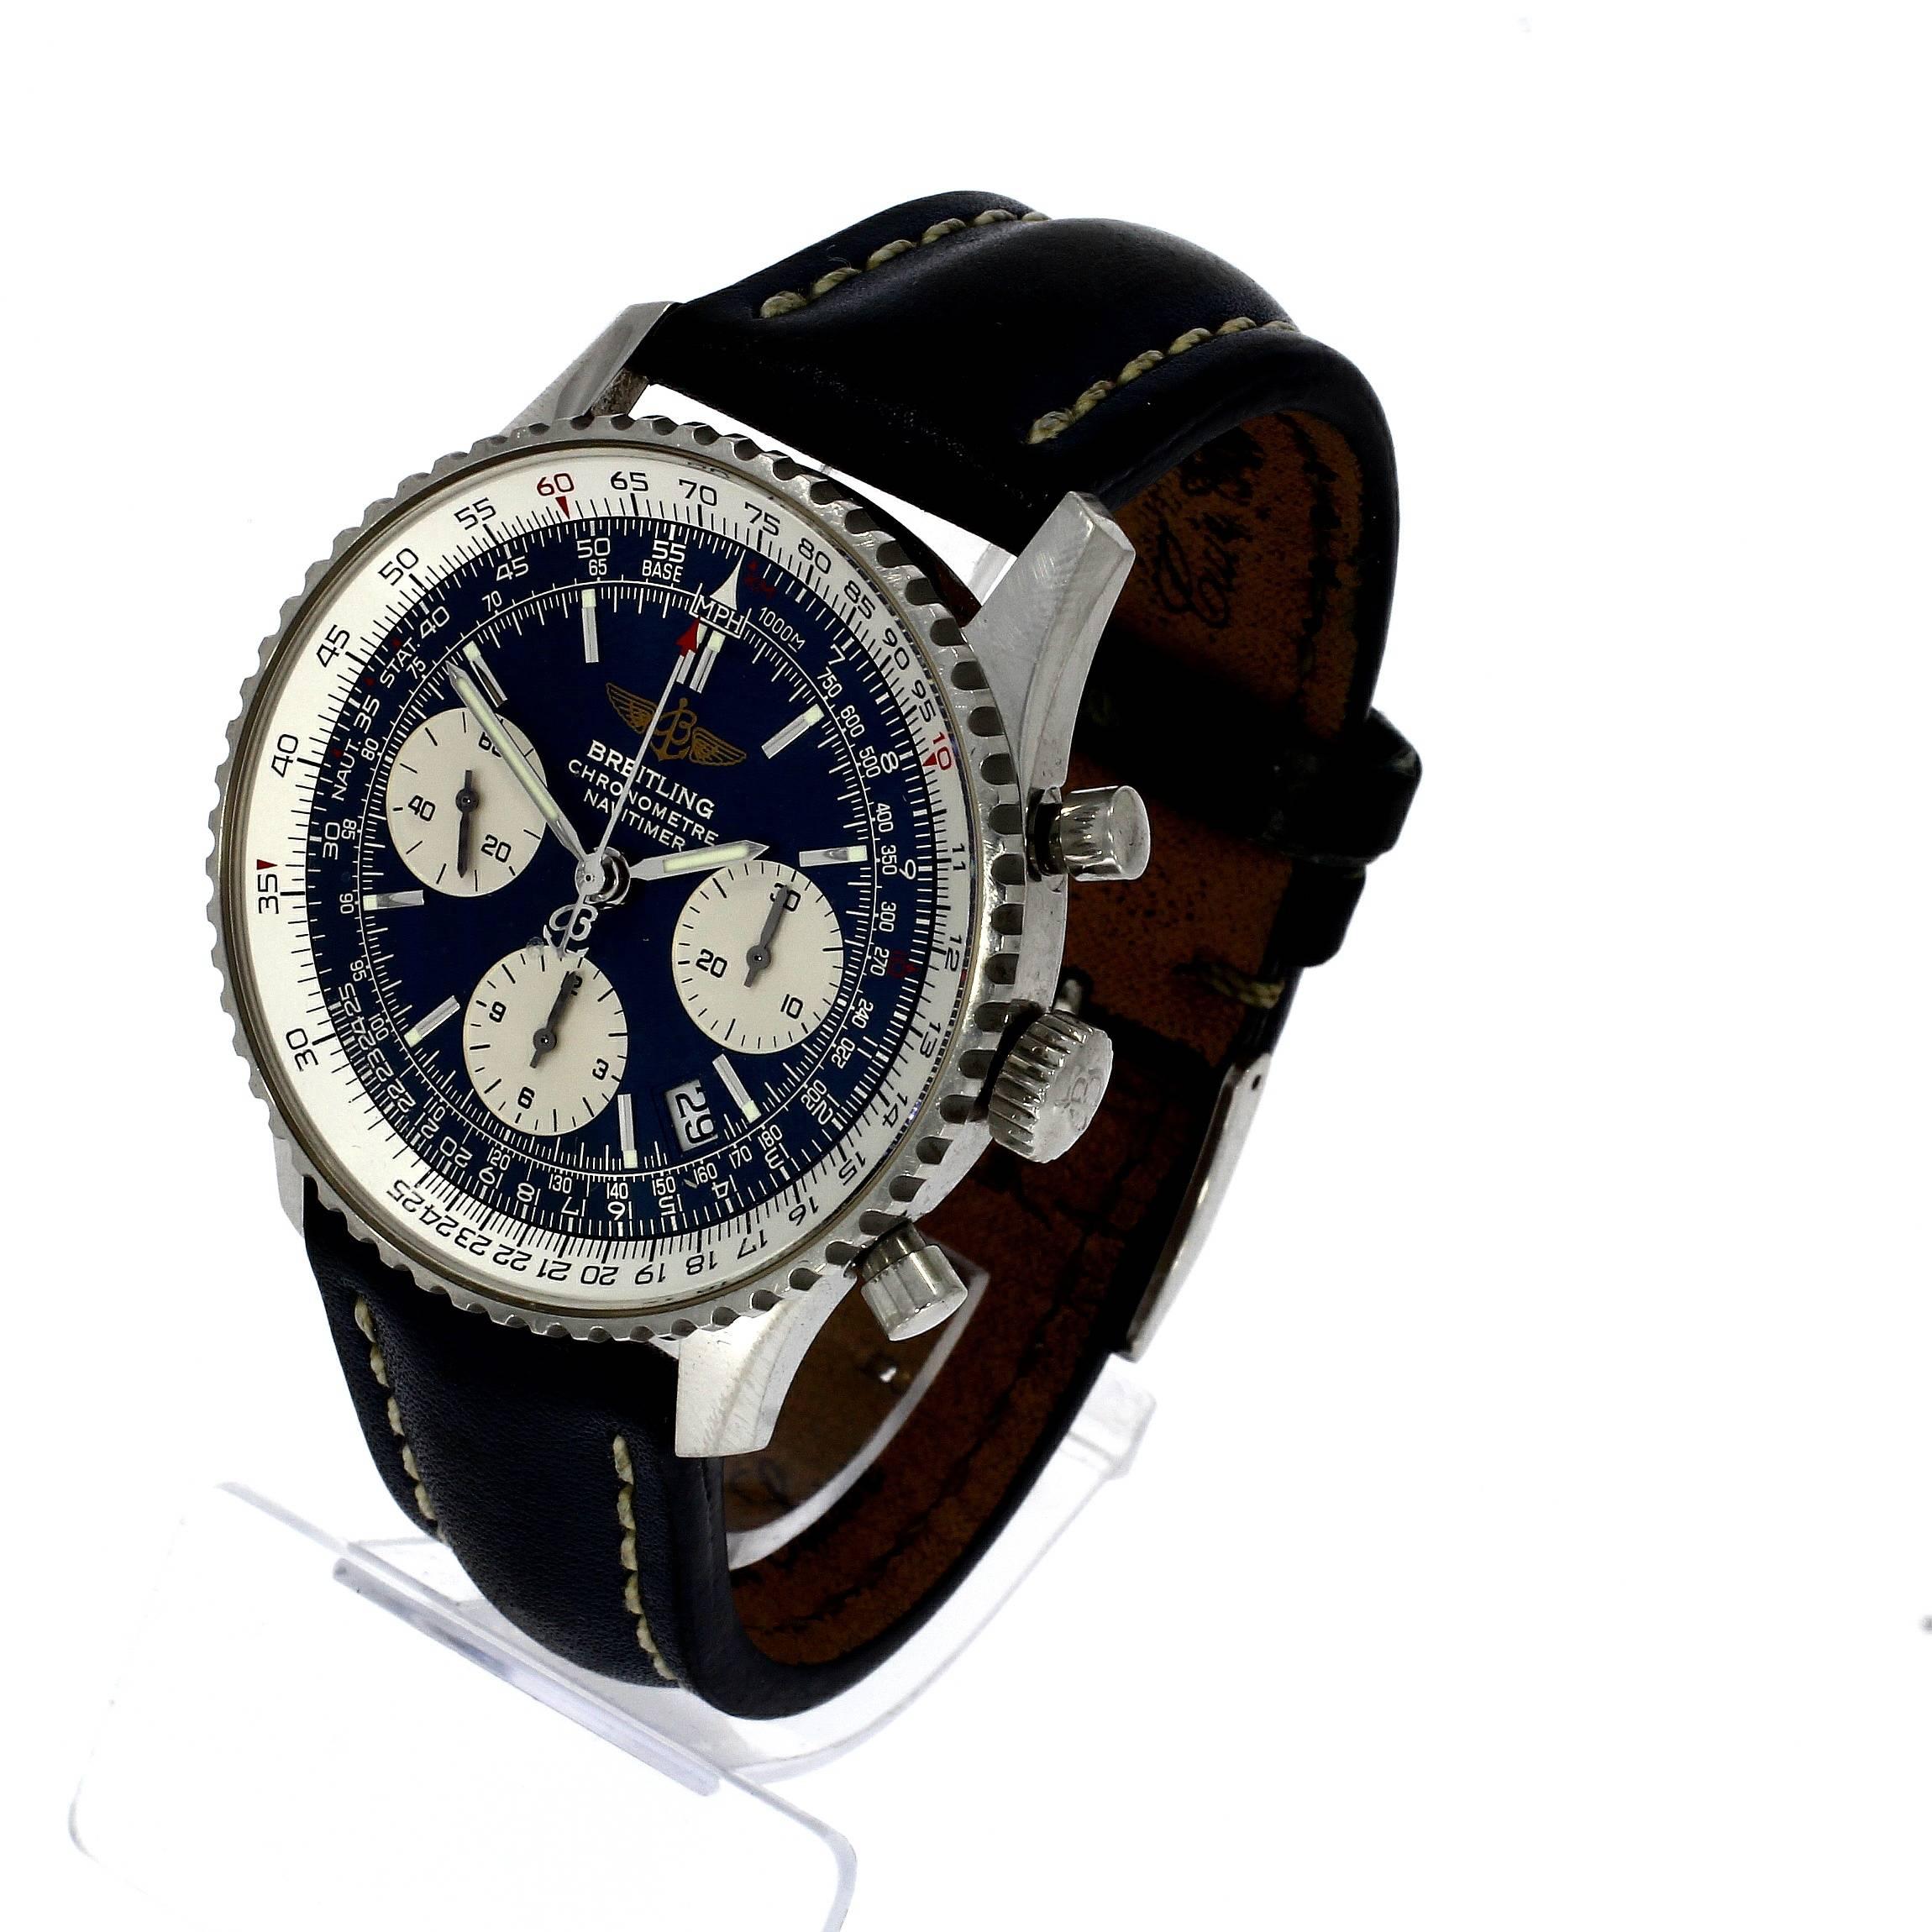 This pre-owned Breitling Navitimer, has a 41mm Steel case. Fitted with a blue dial. An unsigned blue leather strap. With an Automatic B35 Calibre movement. Circa 2007, the case has a serial : 222XXXX

The Breitling Navitimer is the most famous